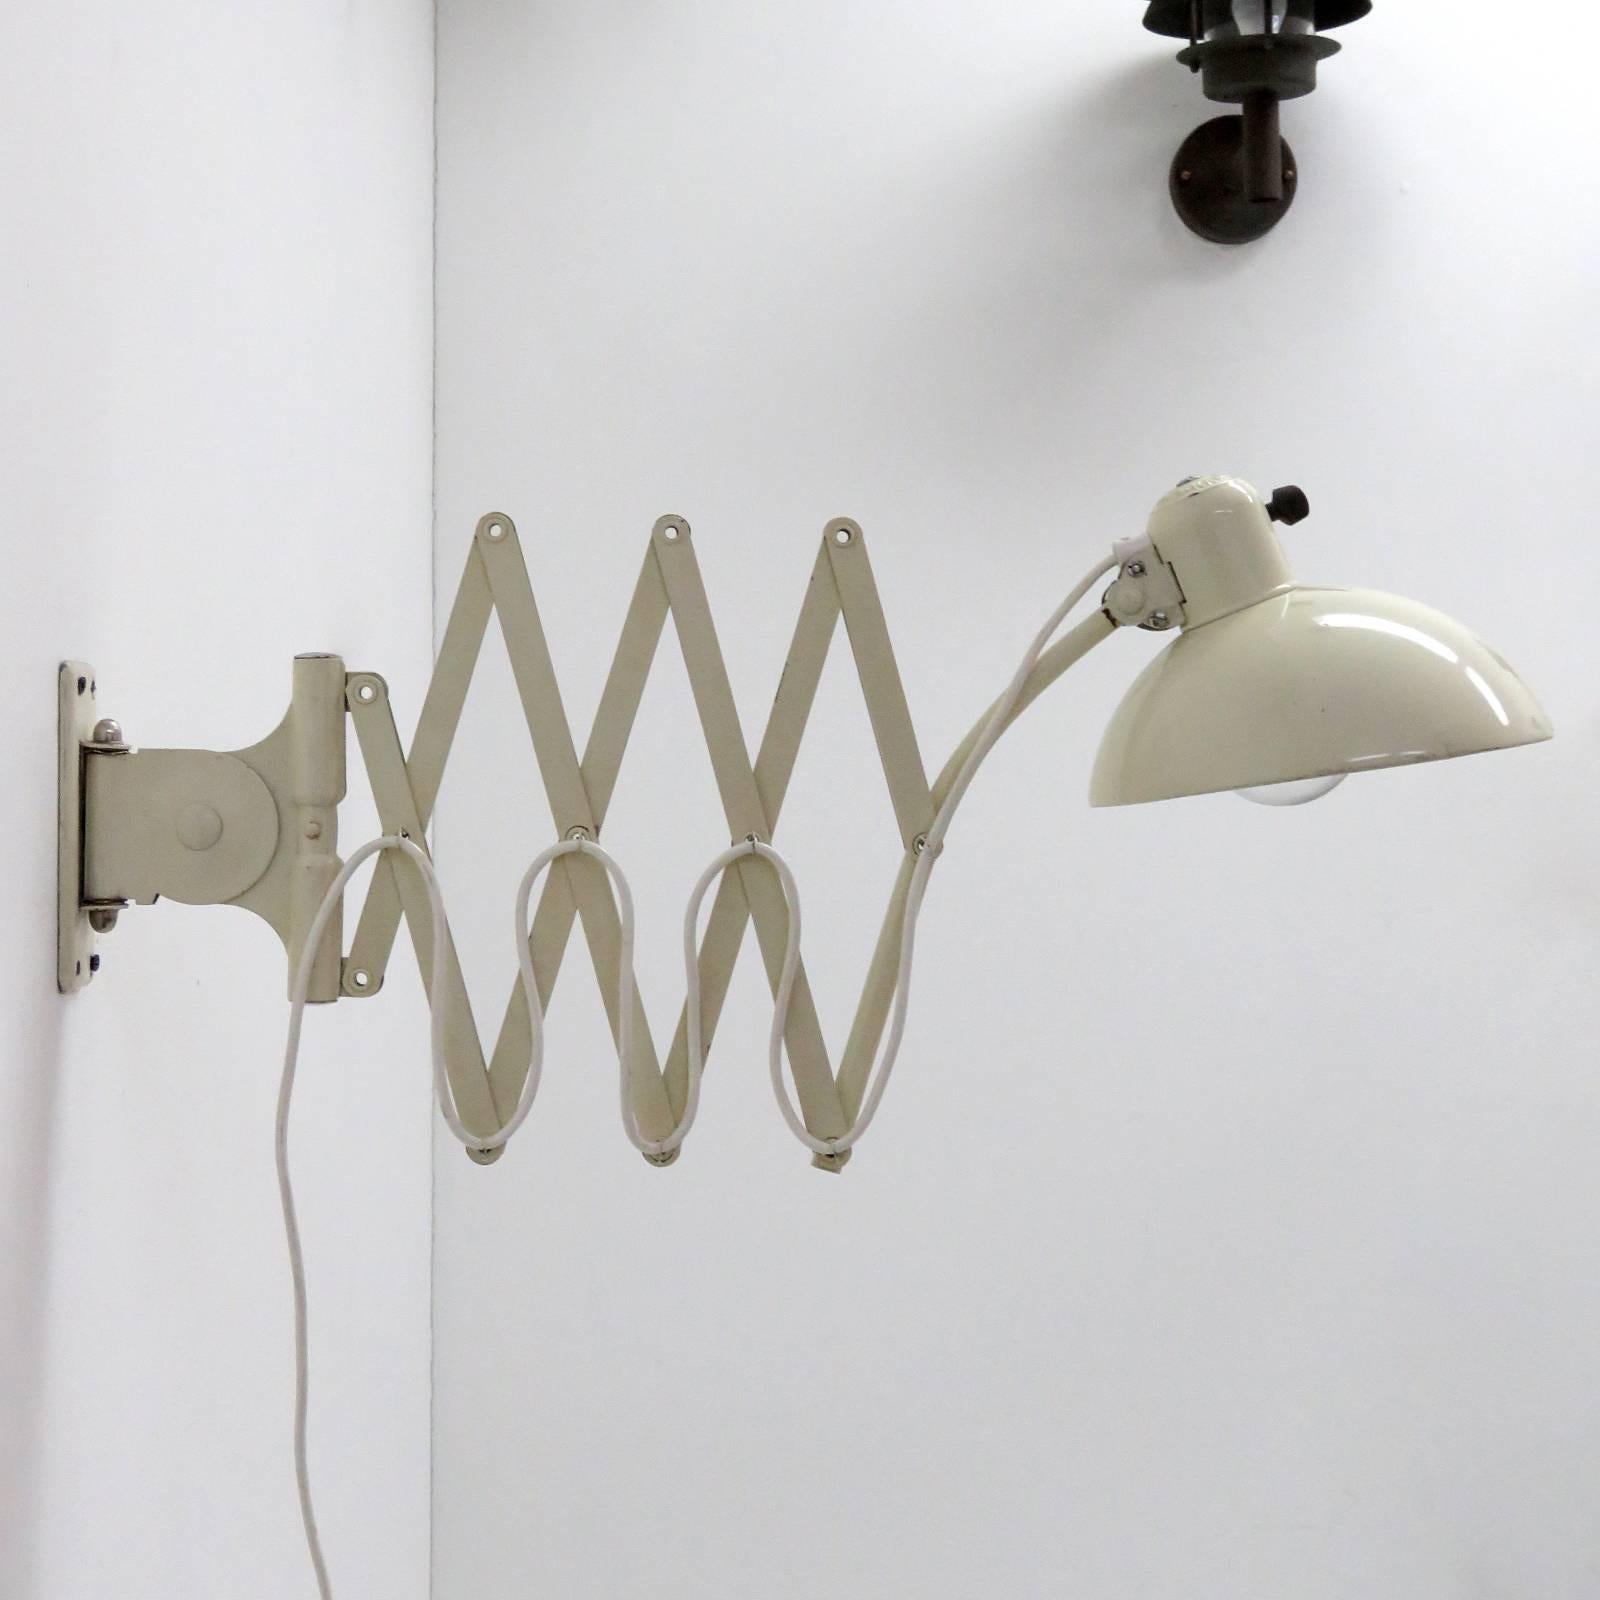 Large wall scissors lamp by Christian Dell for Kaiser Idell, 1933, off-white model No. 6614, maximum cantilever - 49